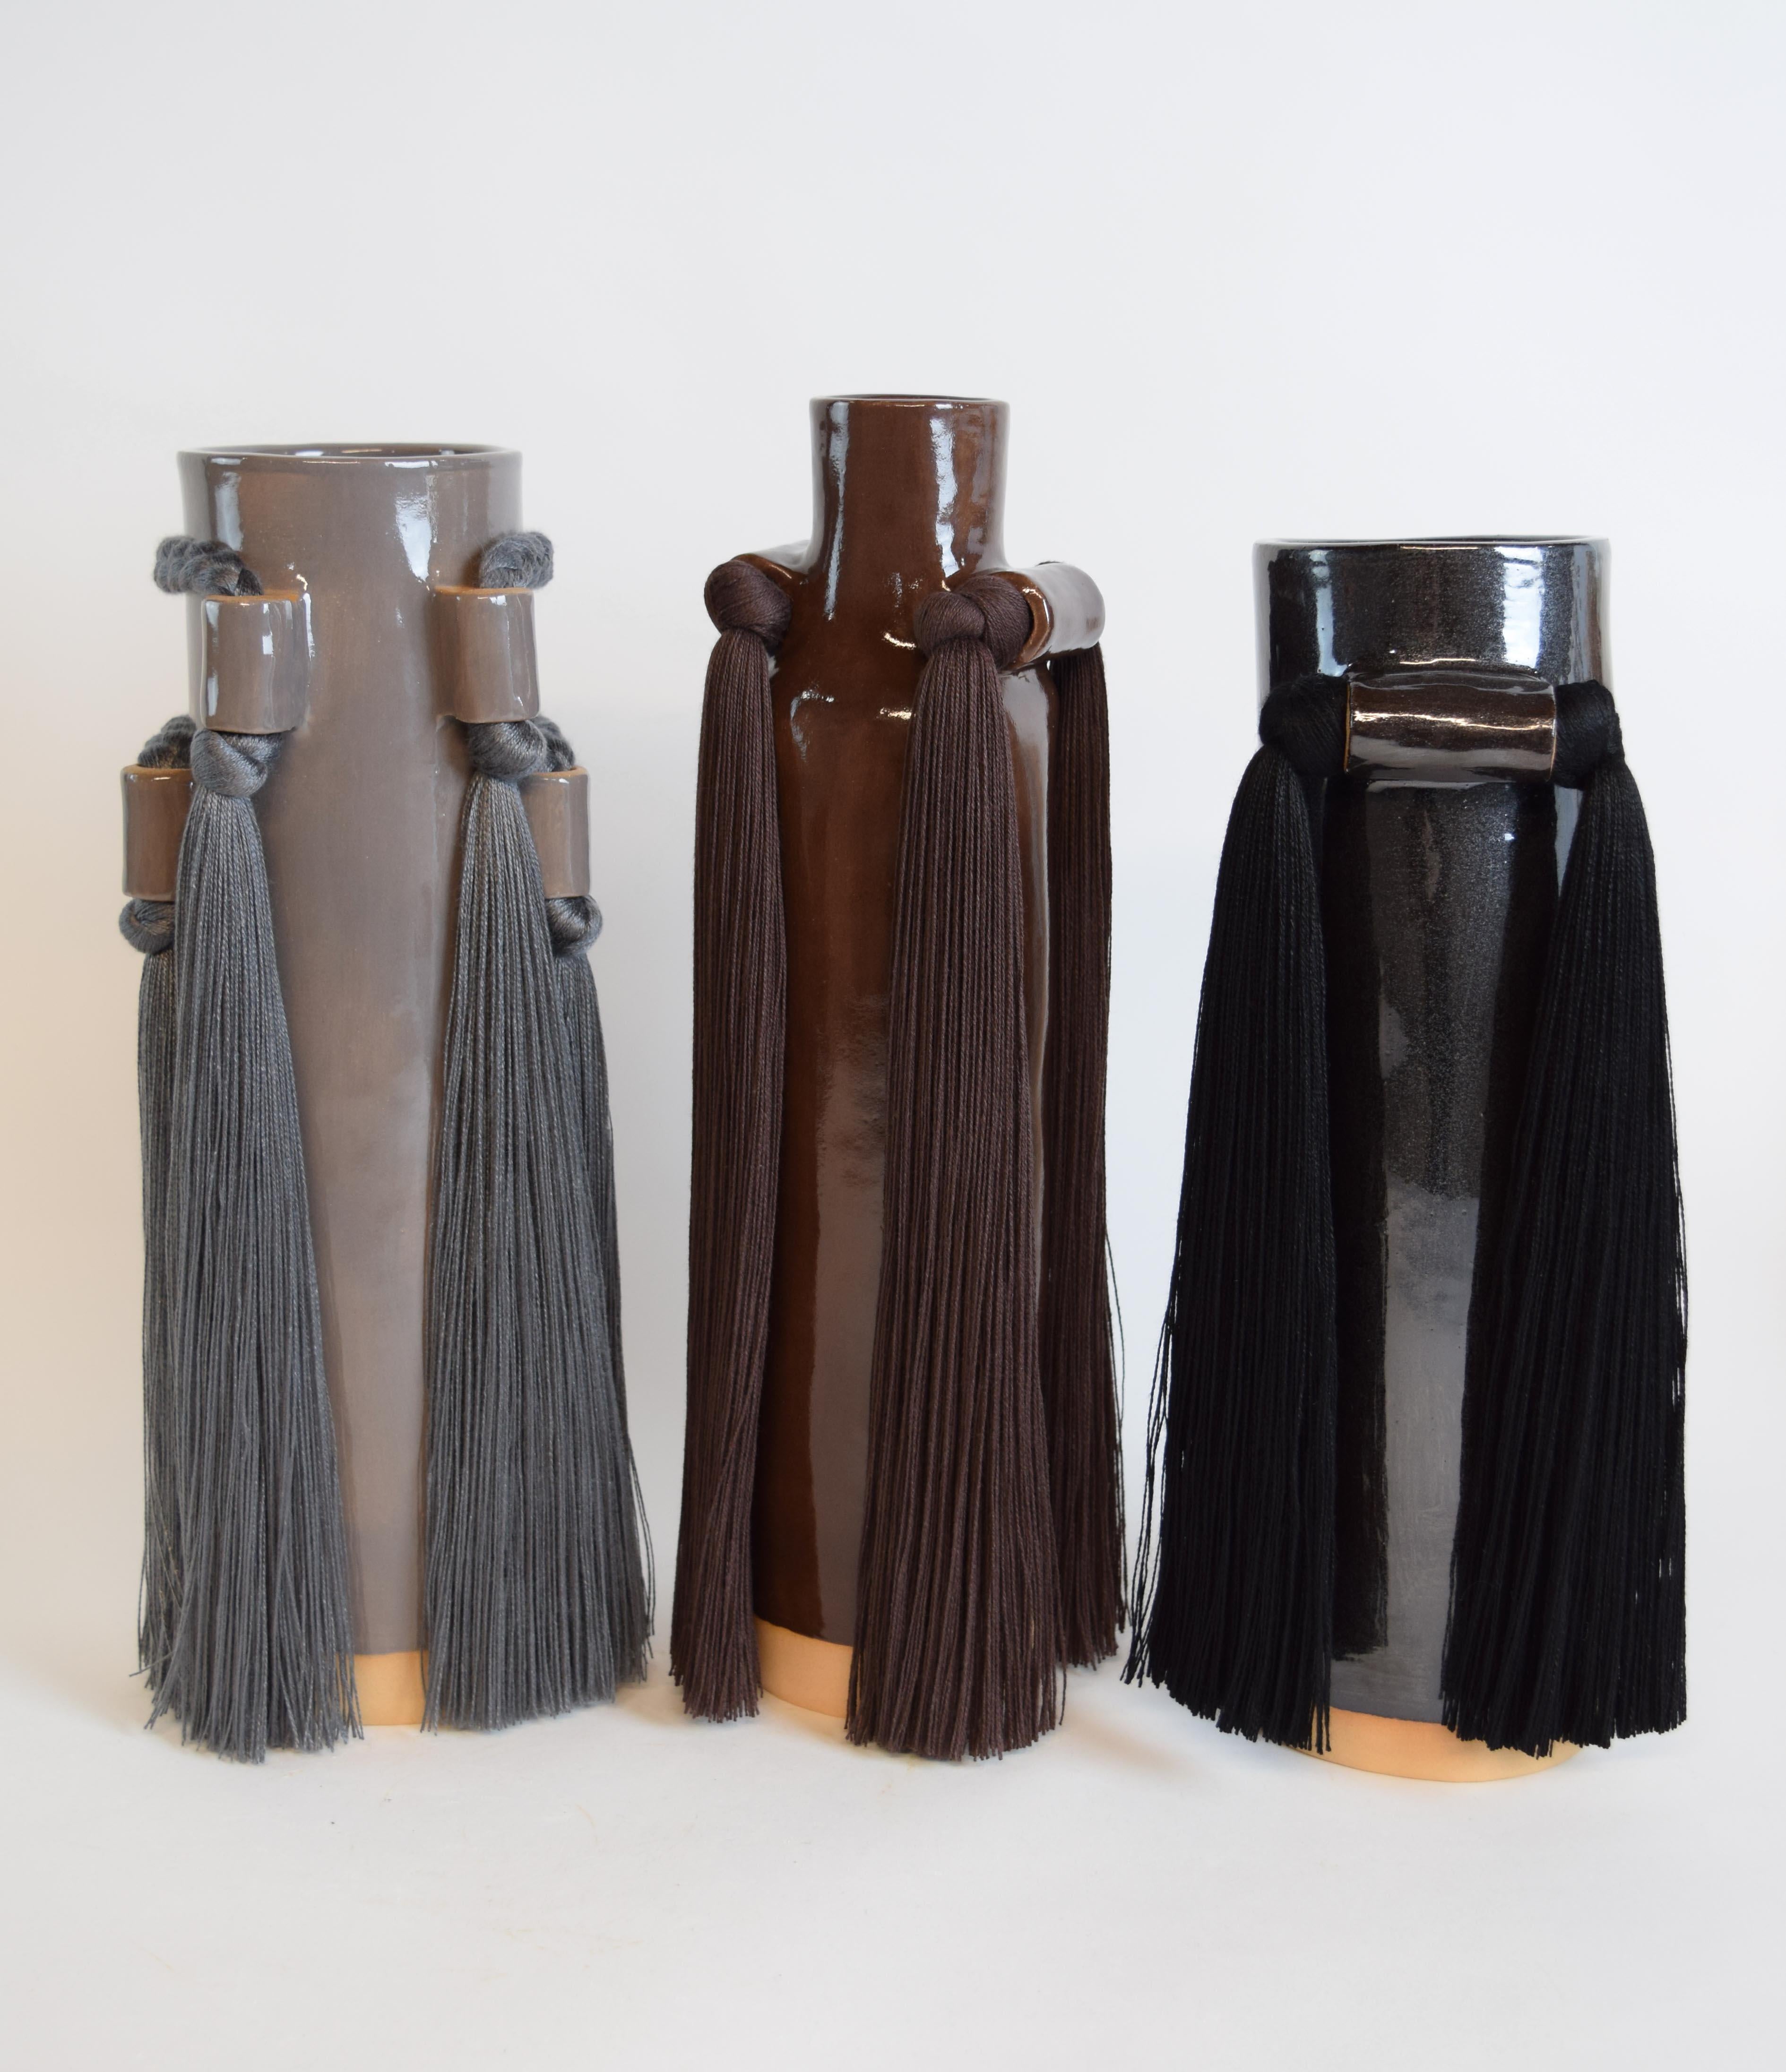 Contemporary Handmade Ceramic Vase #735 in Charcoal with Tencel Braided & Fringe Details For Sale